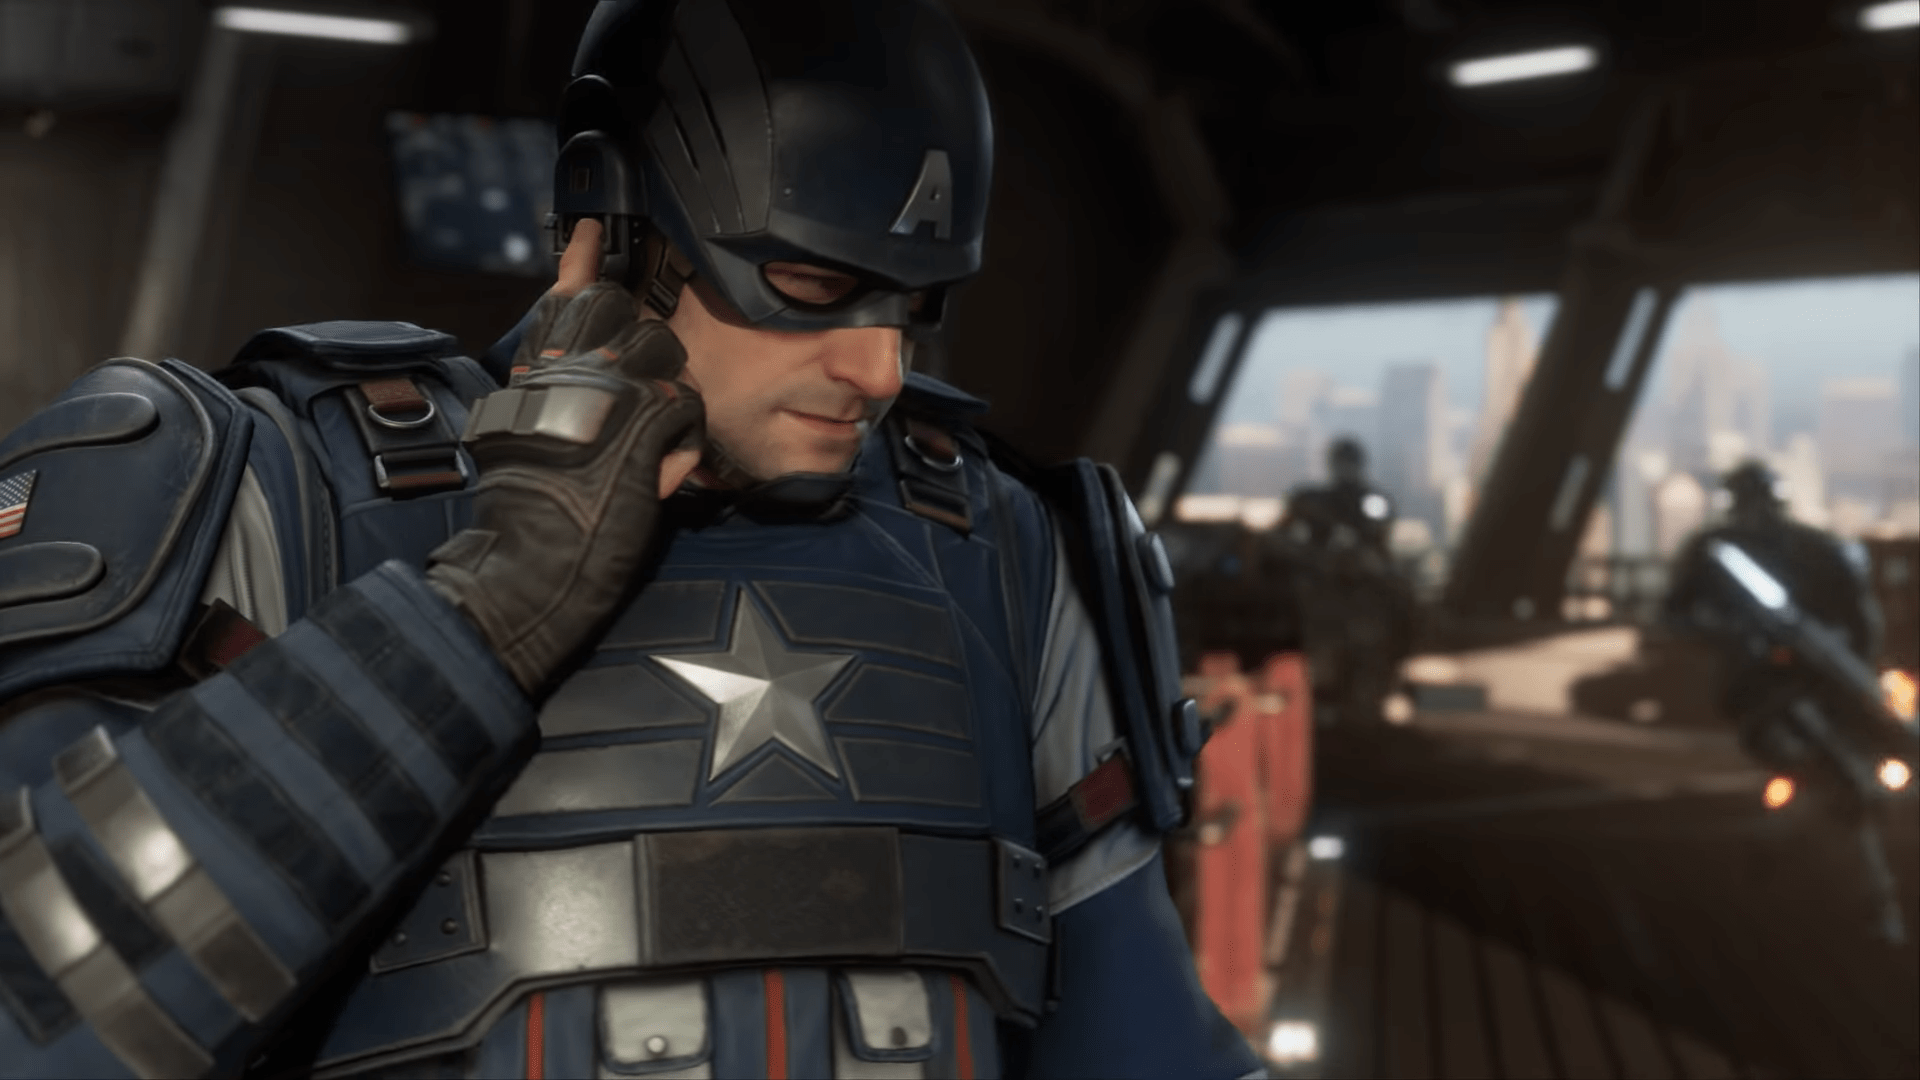 Crystal Dynamics Provided A Little More Insight On Their Decisions With Combat Design In Marvel’s Avengers